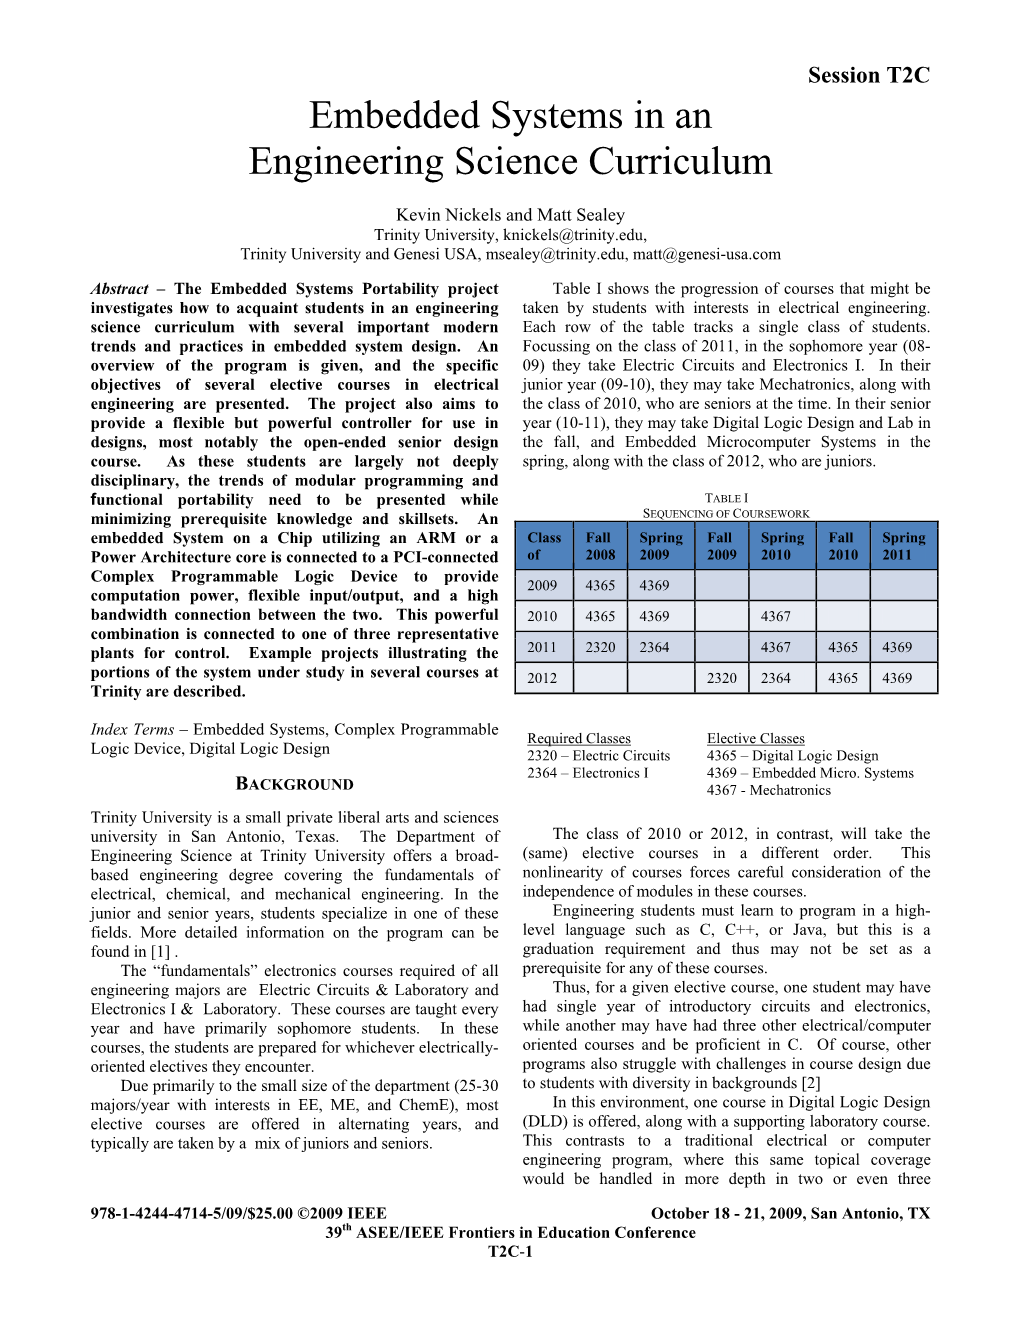 Embedded Systems in an Engineering Science Curriculum